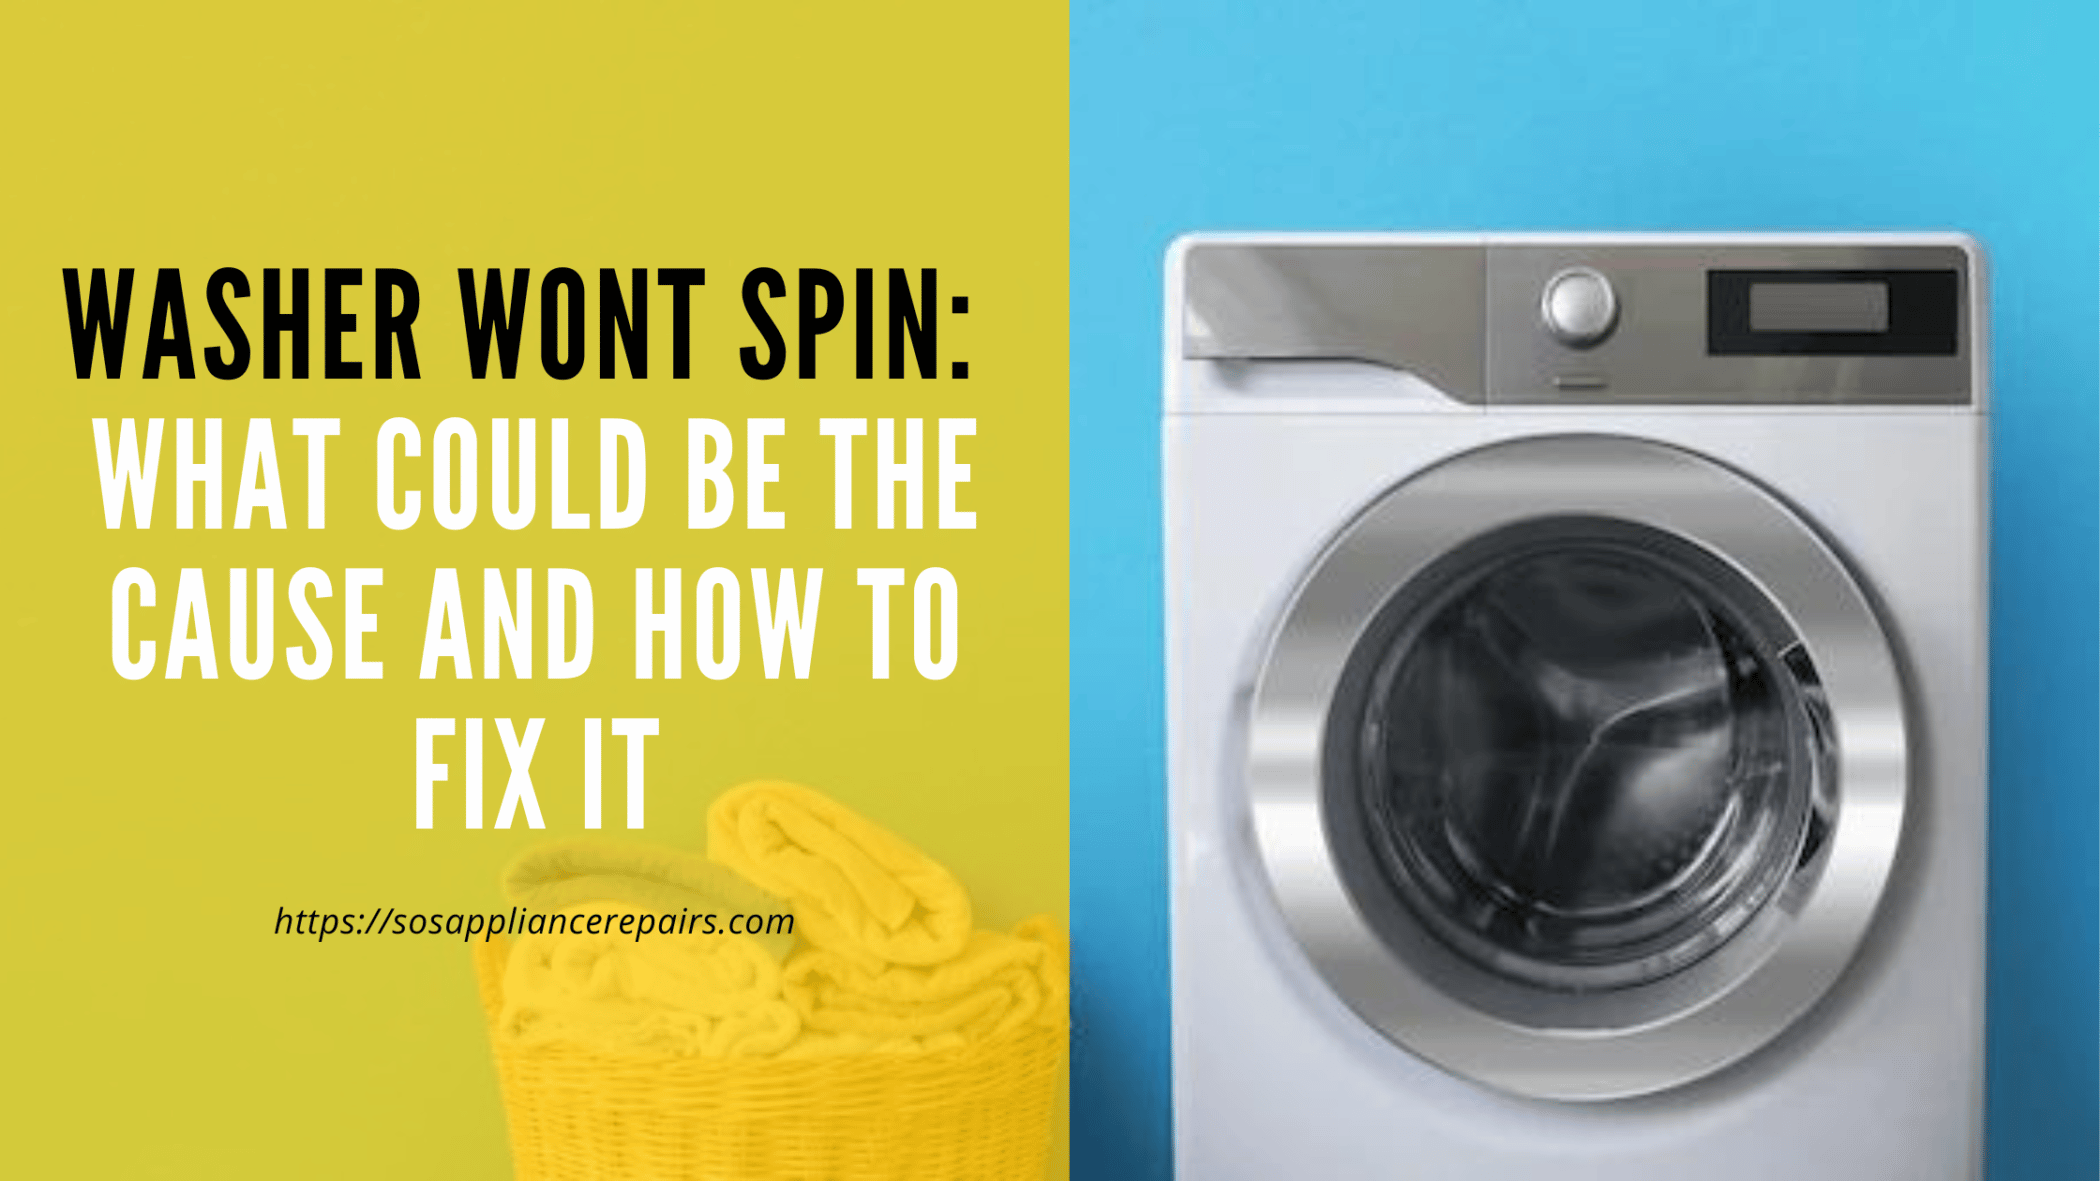 Washer won’t spin